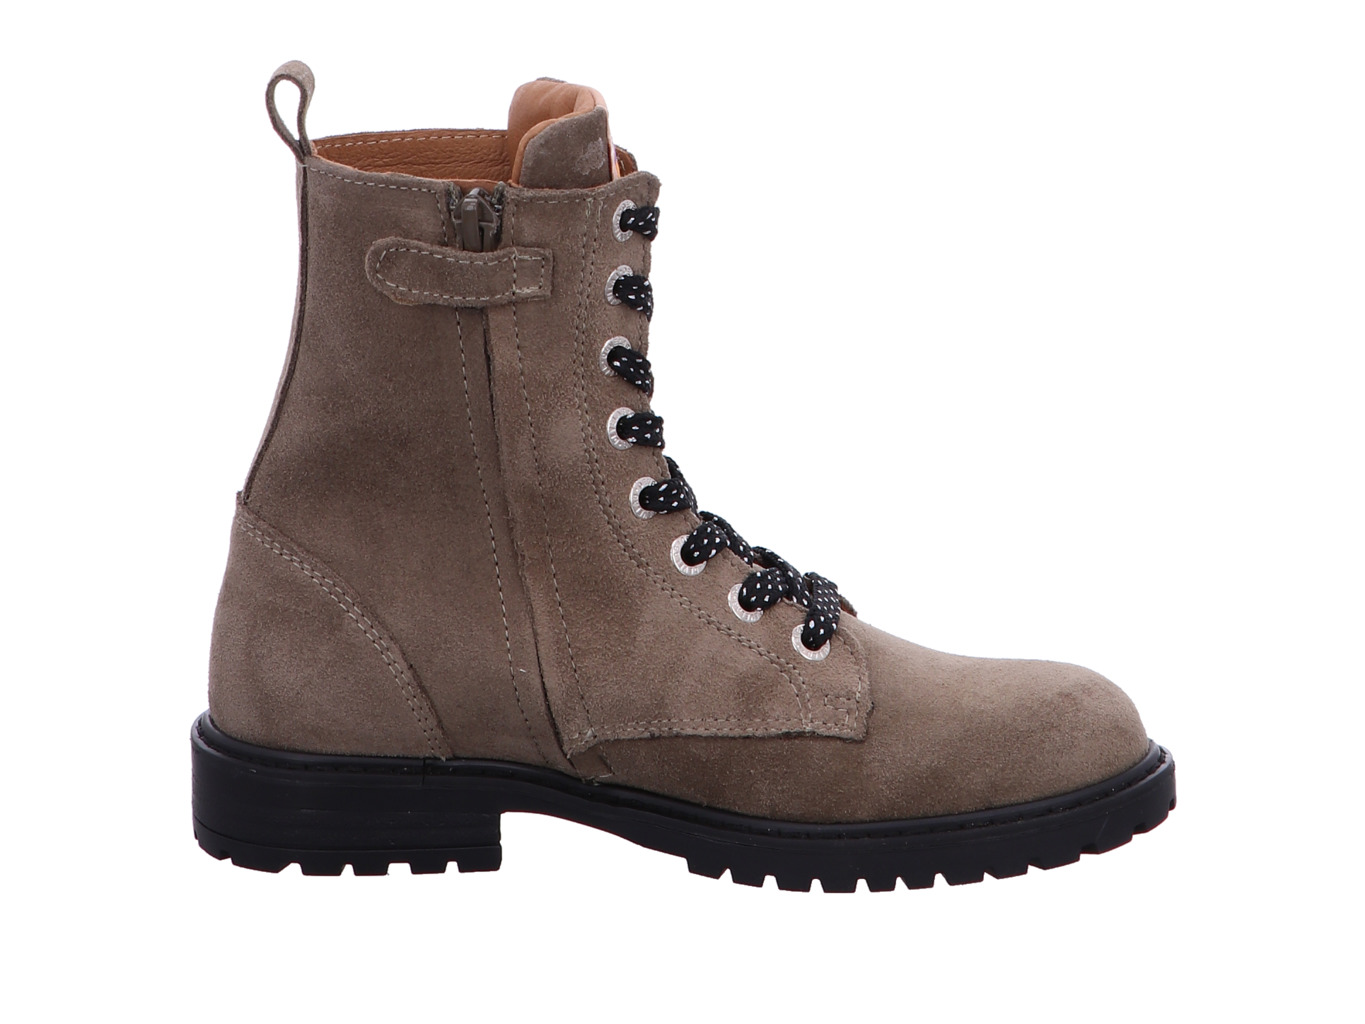 develab_girls_mid_boot_laces_42850_233_4184